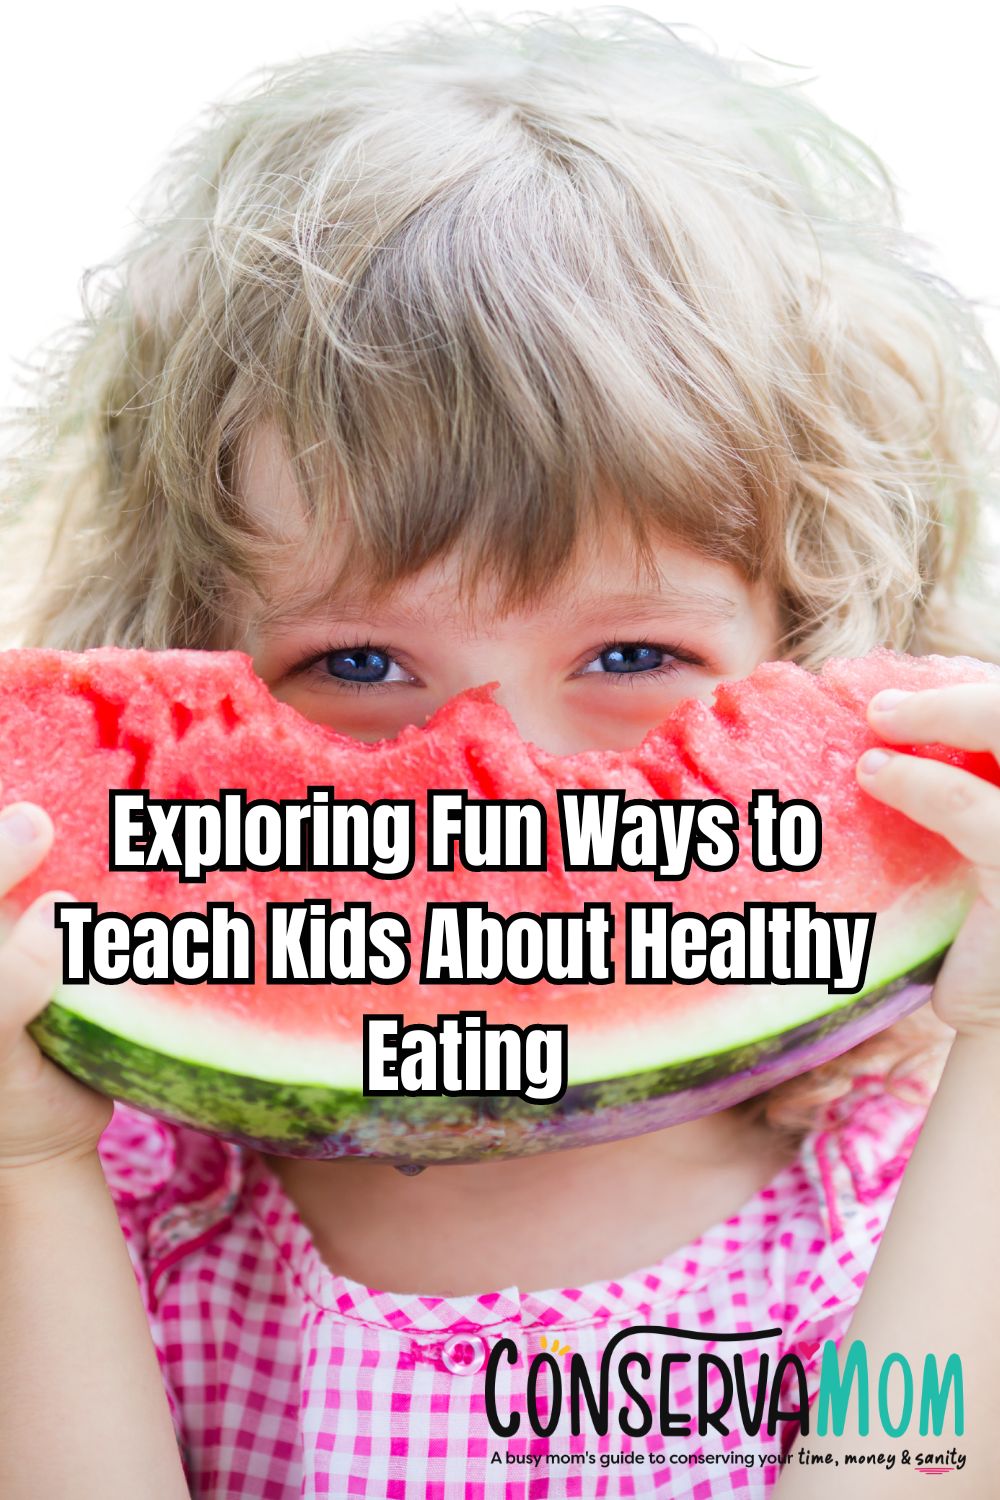 Exploring Fun Ways to Teach Kids About Healthy Eating